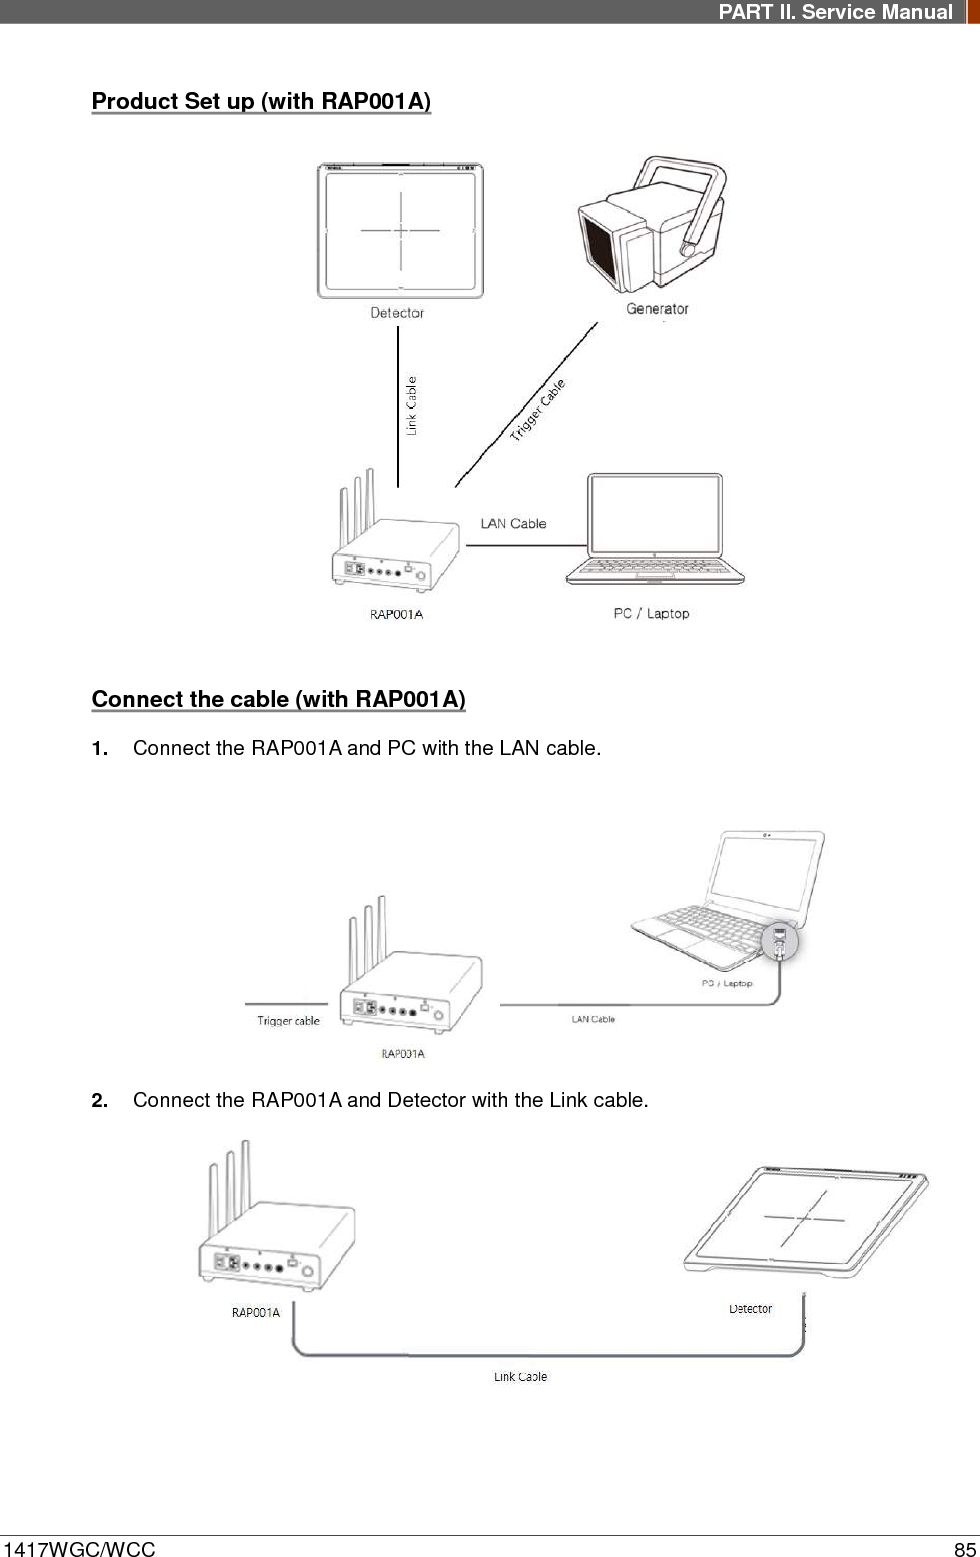 PART II. Service Manual  1417WGC/WCC 85 Product Set up (with RAP001A)   Connect the cable (with RAP001A) 1. Connect the RAP001A and PC with the LAN cable.   2. Connect the RAP001A and Detector with the Link cable.                 